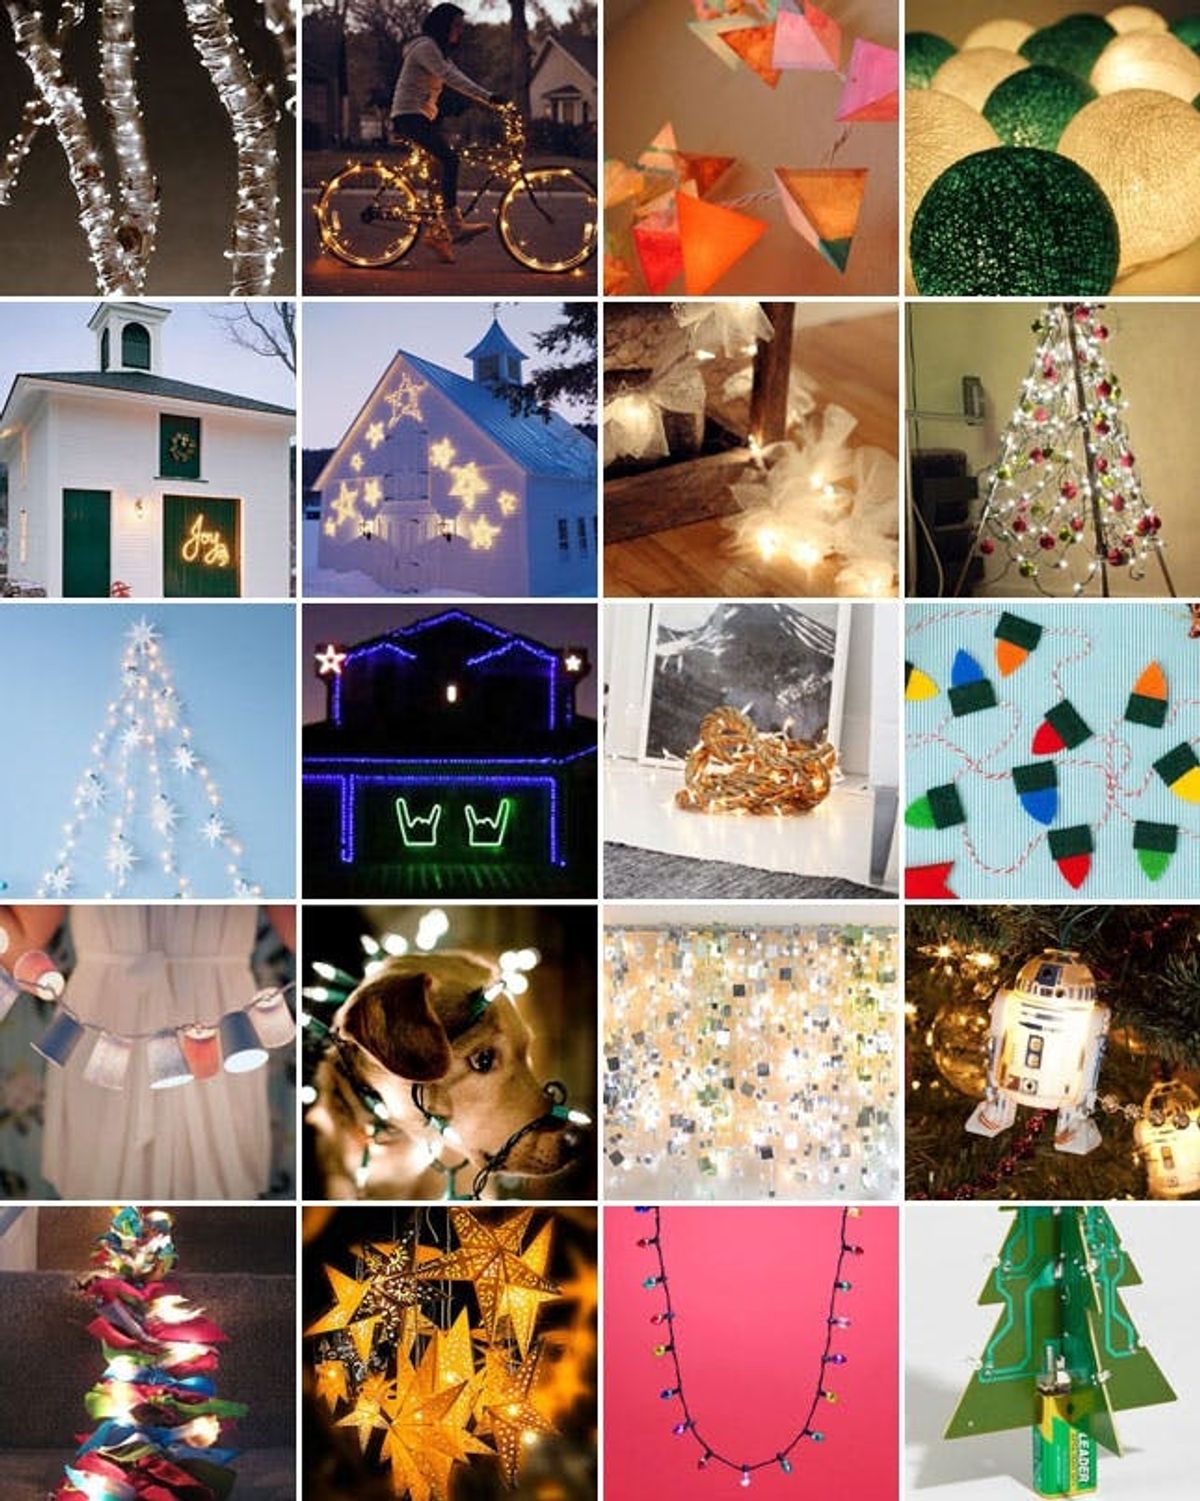 Let There Be Light! 19 Festive Holiday Light Ideas